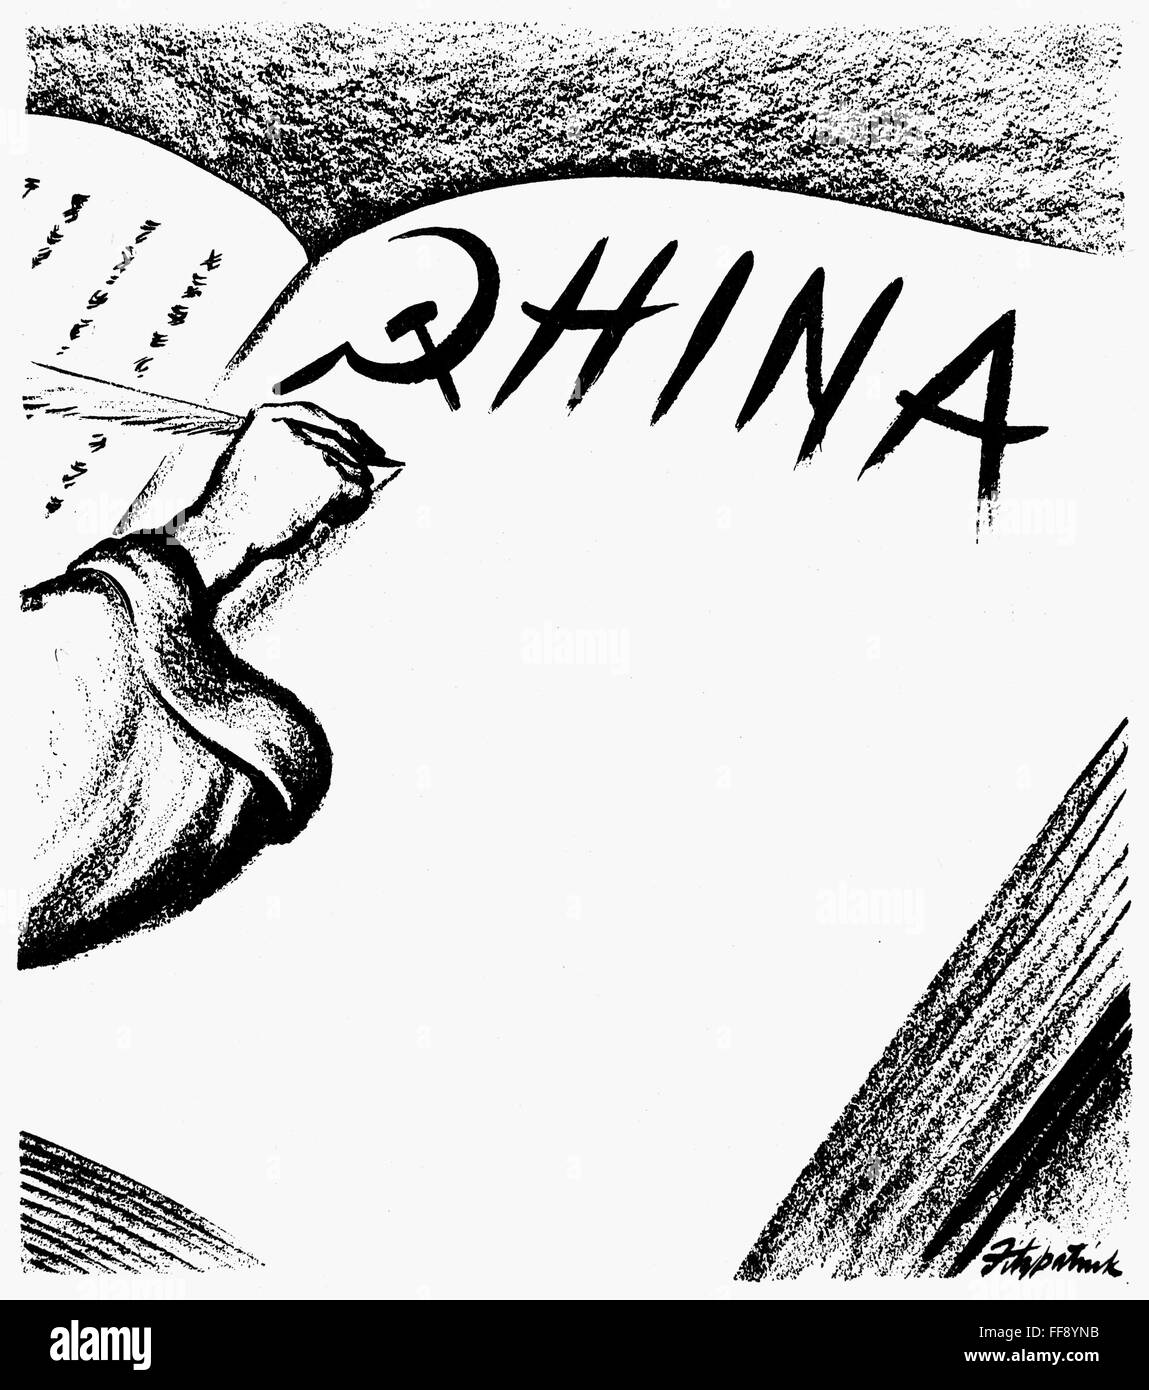 CHINA: COMMUNISM CARTOON. /n'New Page in a Long History'. American cartoon, 1949, by D.R. Fitzpatrick on the establishment of Communist rule in China and of the People's Republic of China. Stock Photo